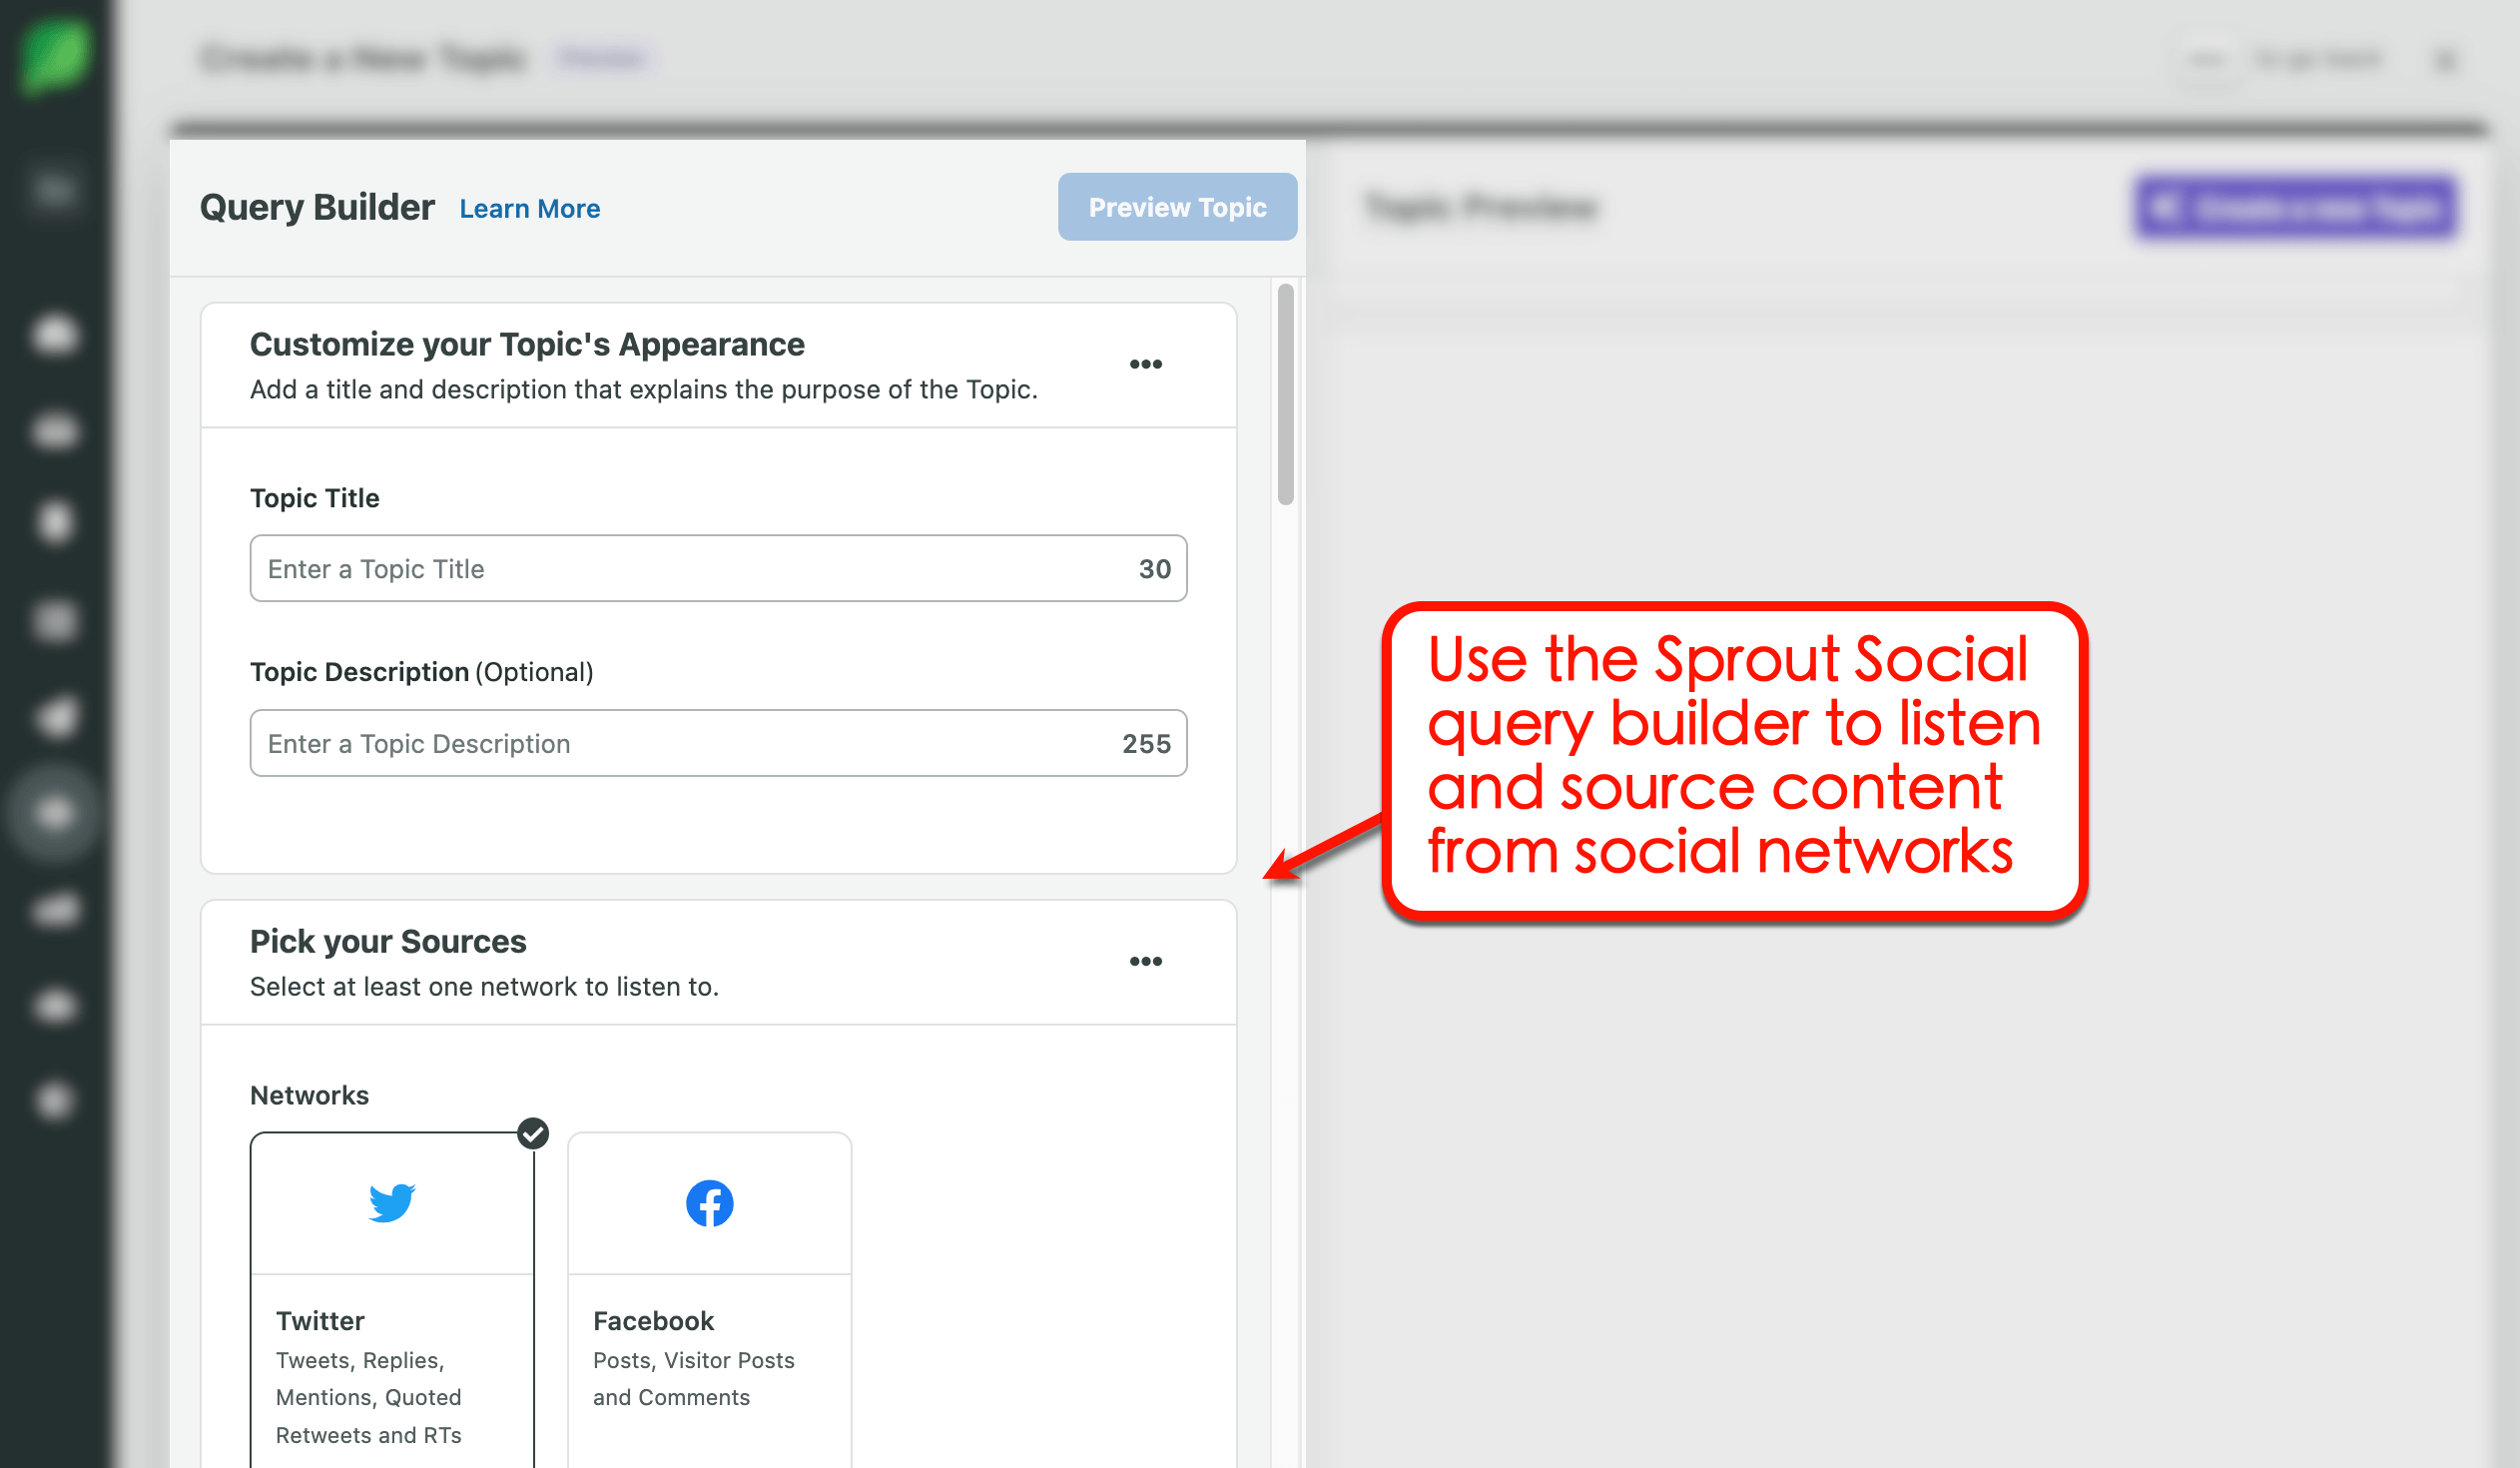 Sprout Social's query builder